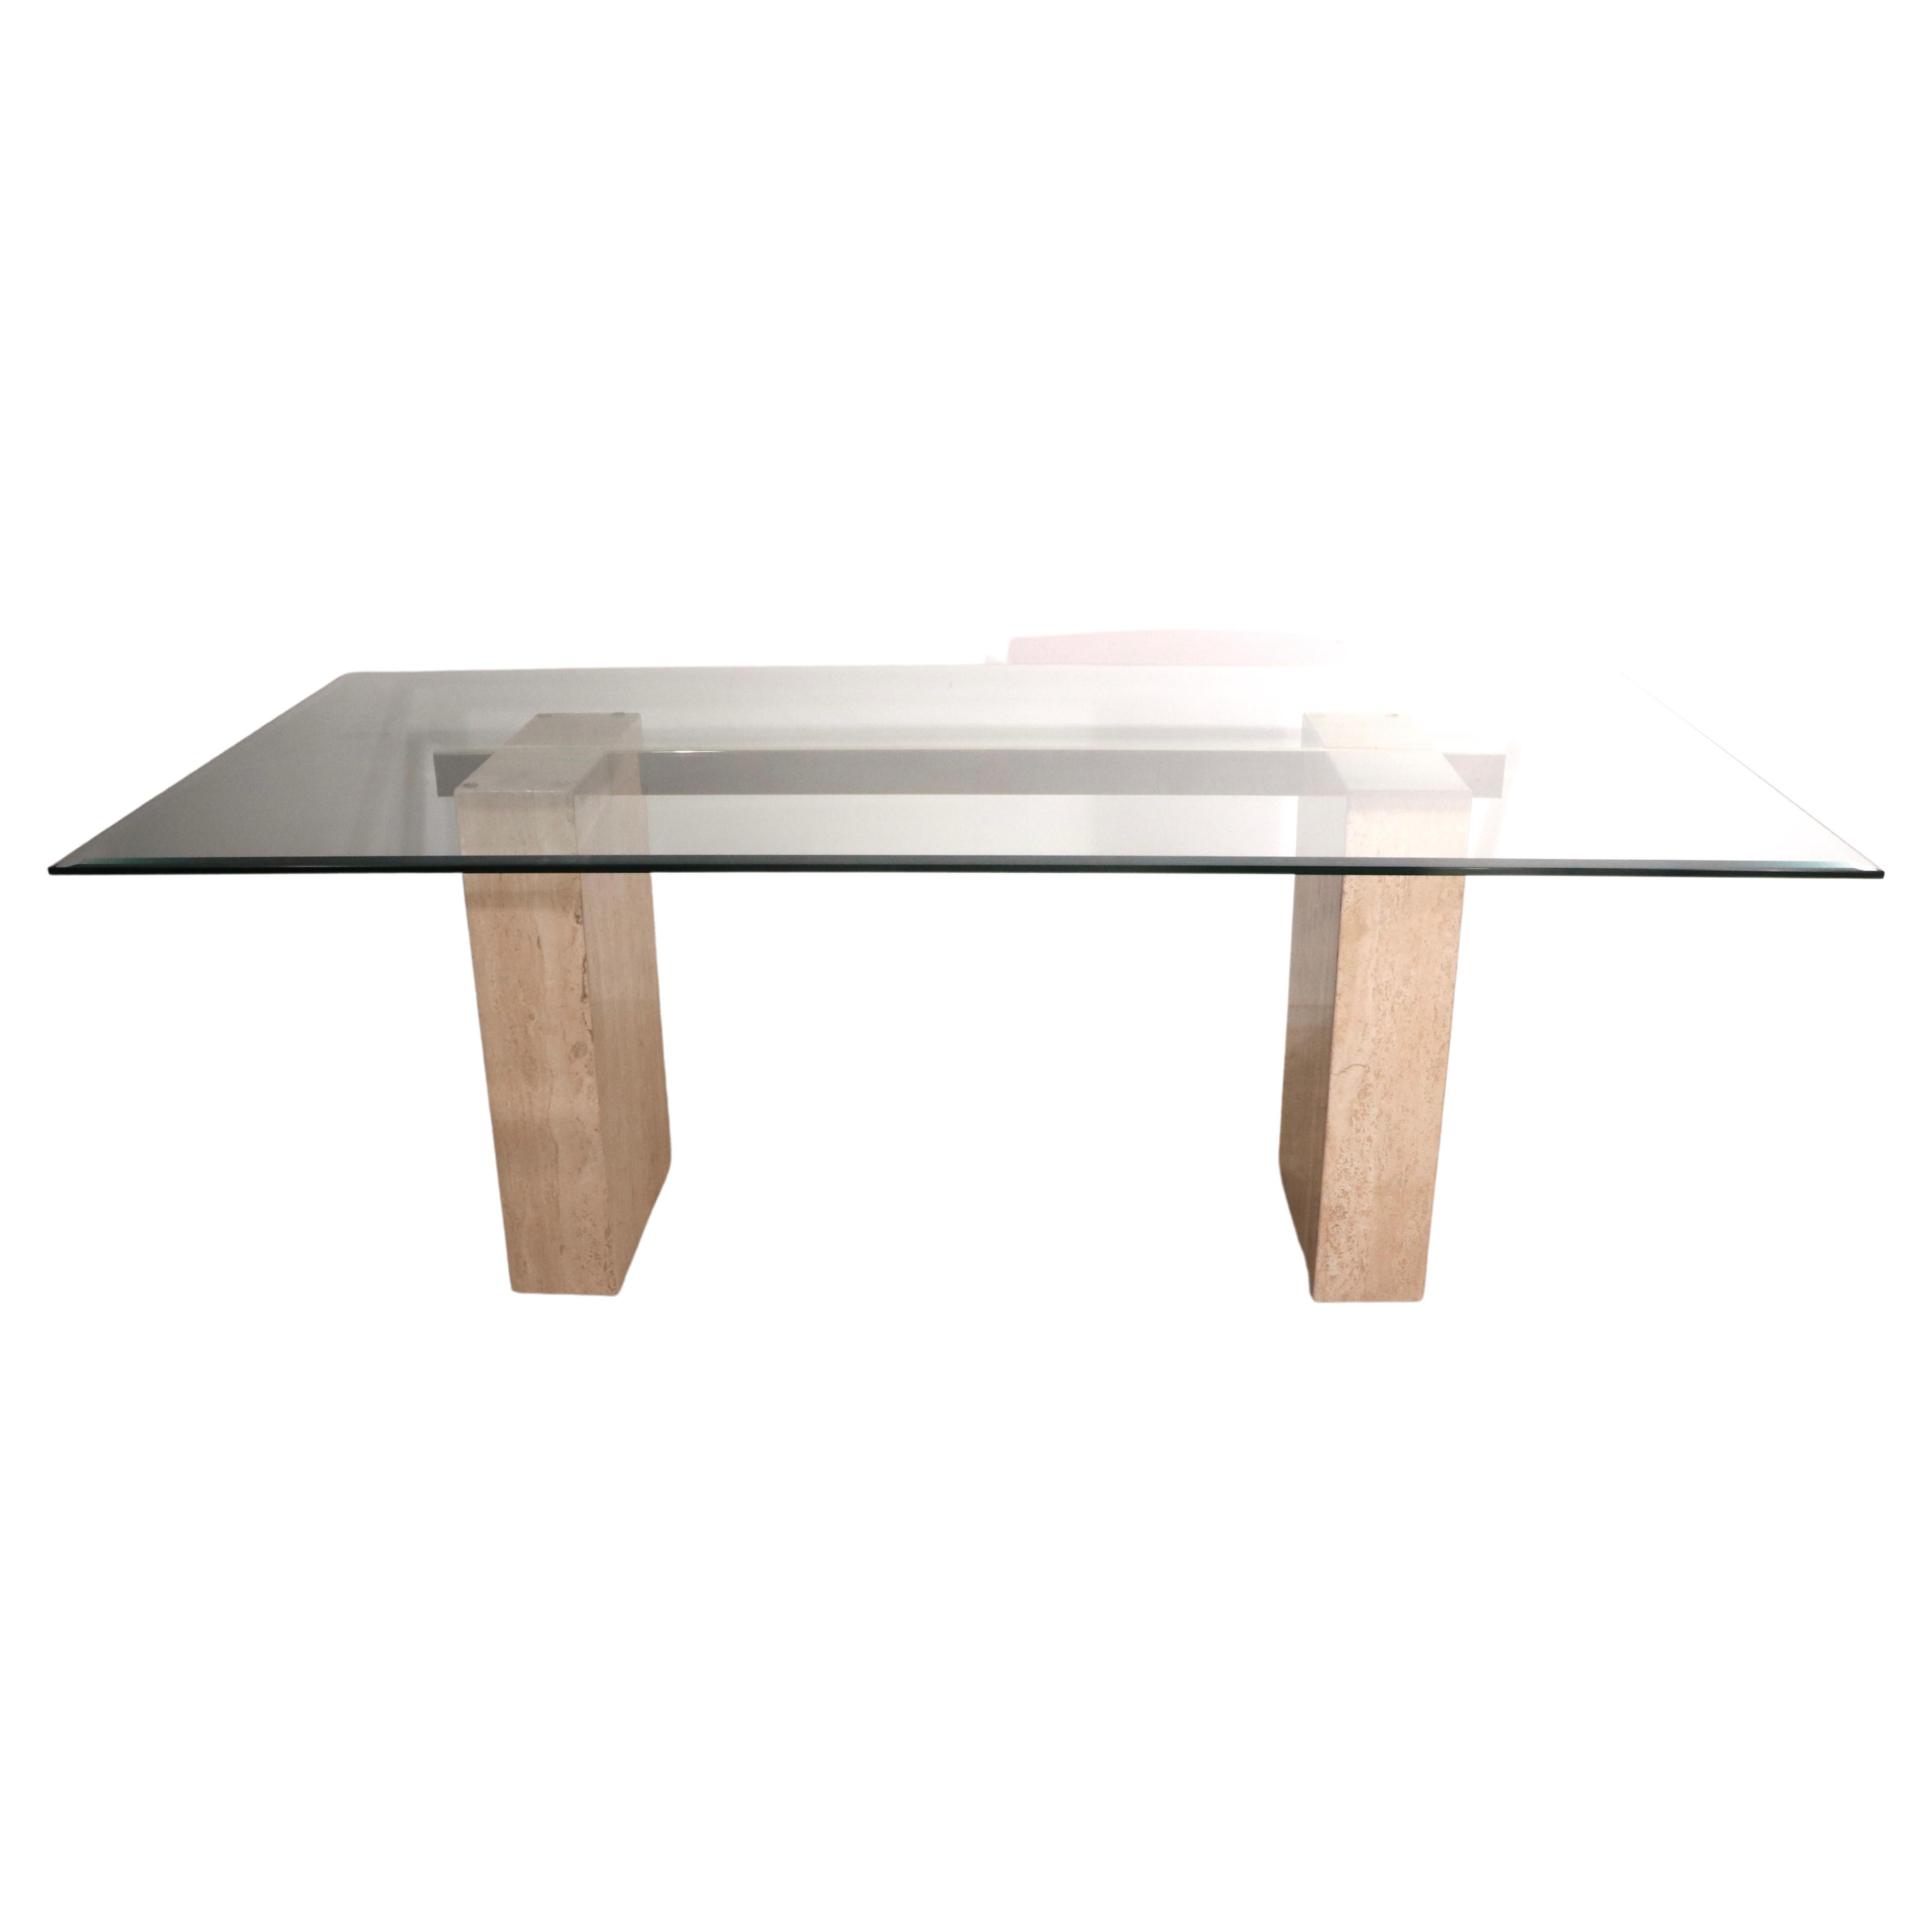 Chic, voguish, and sophisticated late 20th C large dining table by noted Italian furniture maker Artedi. The table features an impressive beveled plate glass top ( 78.25. x 39. 25 x 3/8 inch ) which rests on two marble pedestals, with a connecting